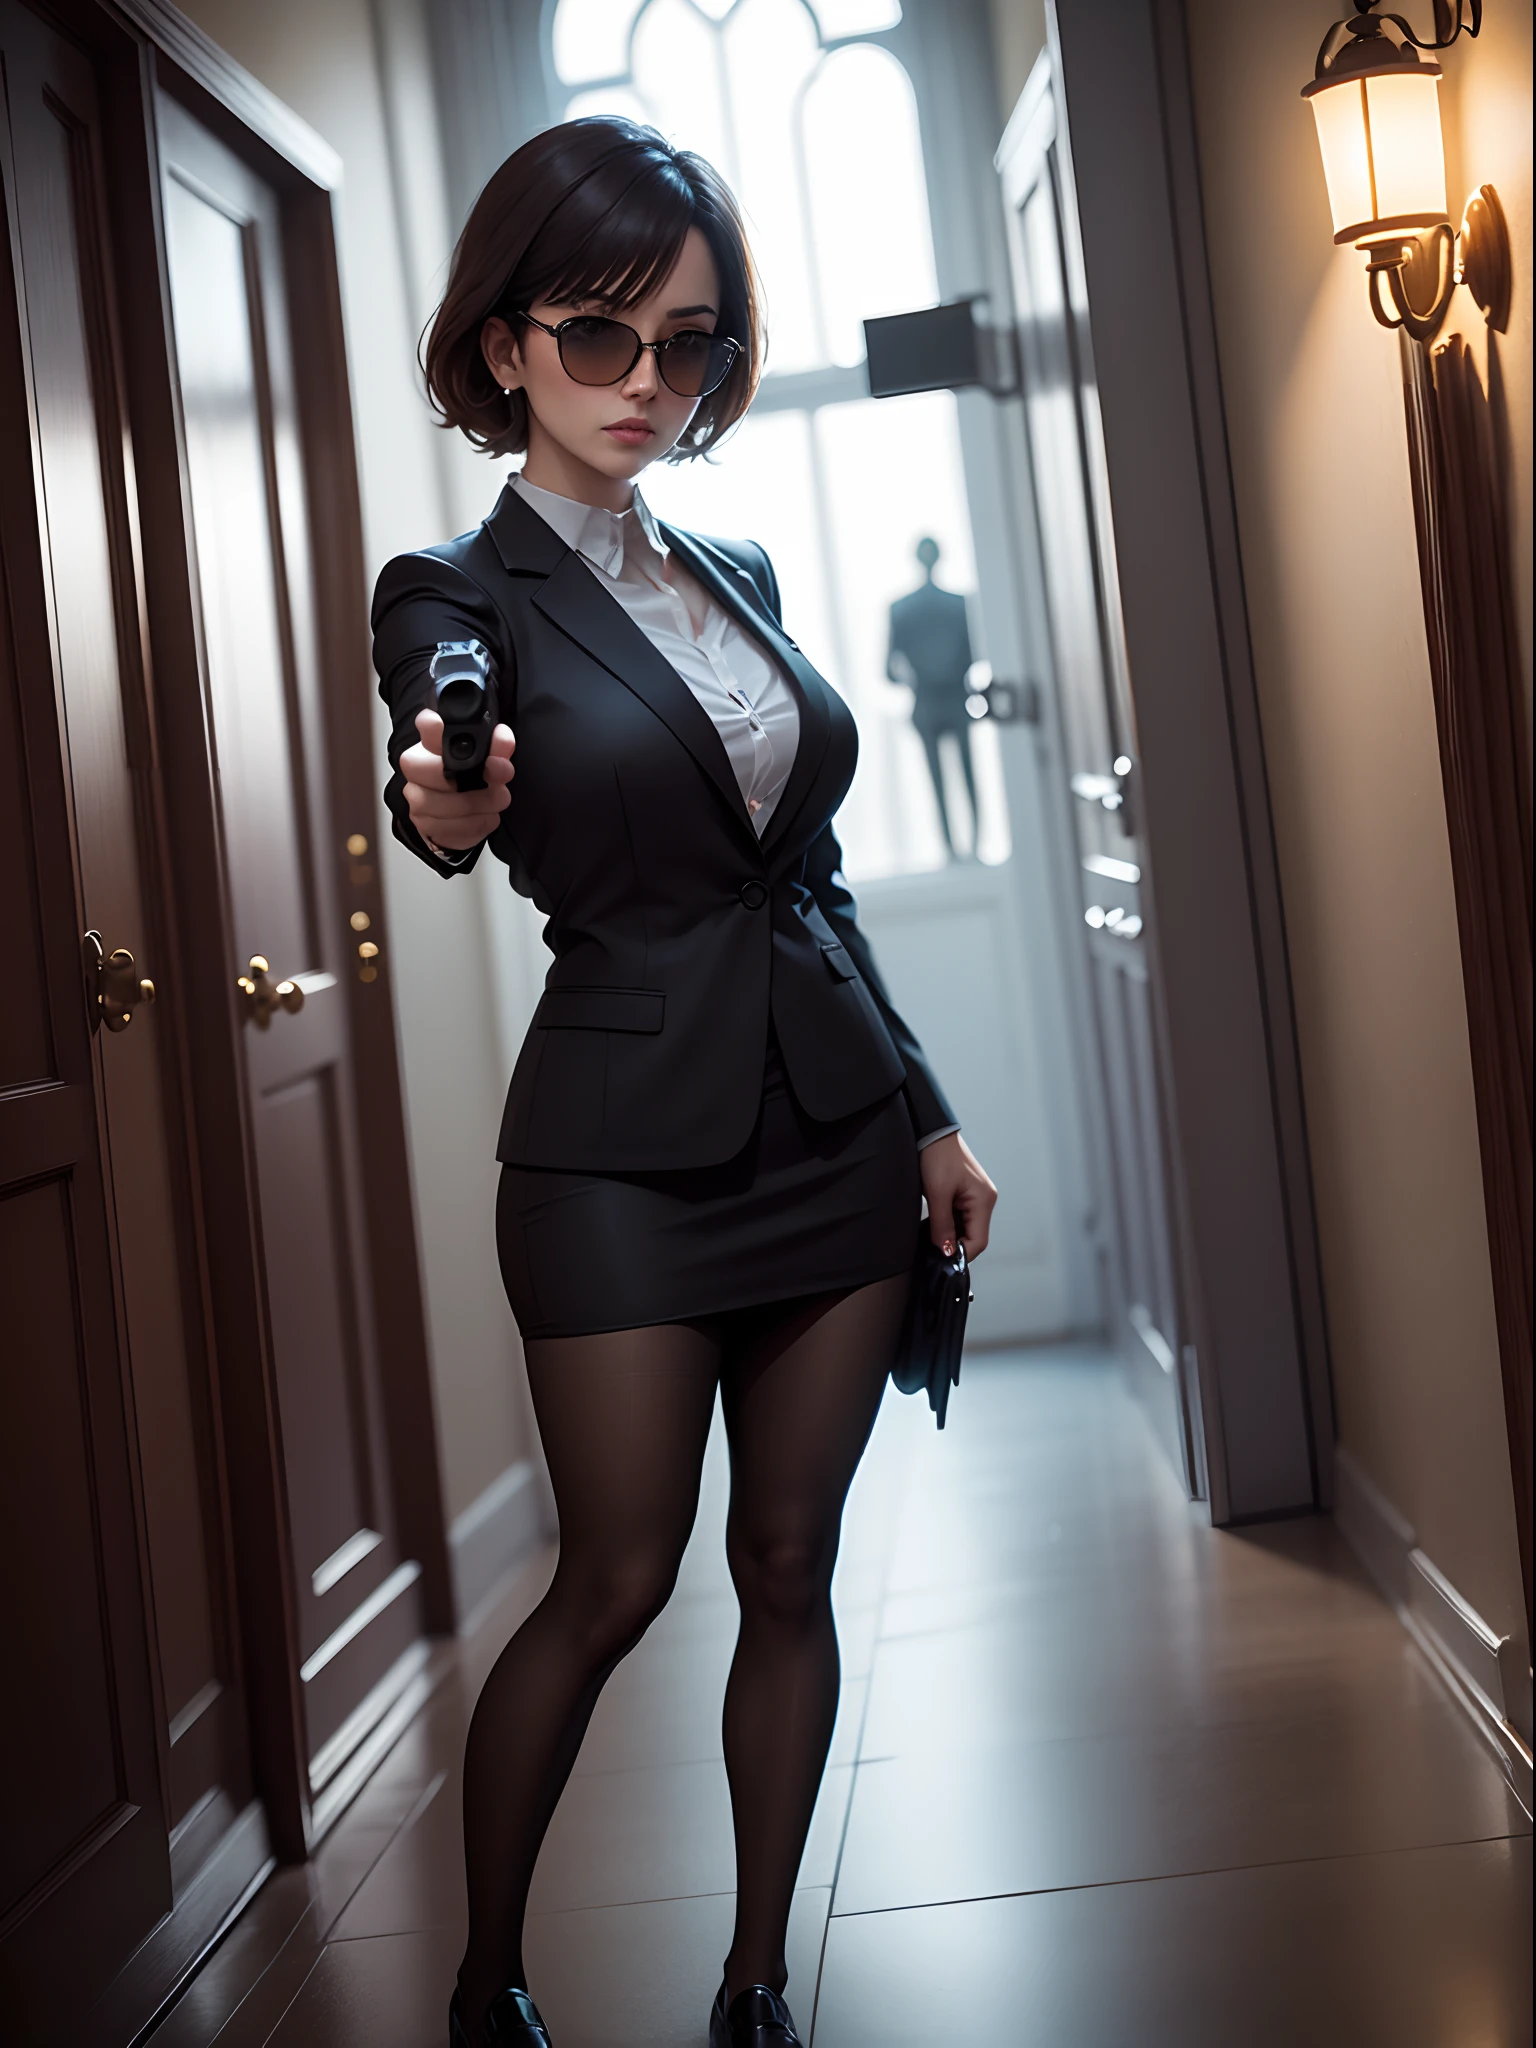 1woman, mature woman, handgun, masterpiece, best quality, black suit and tie, pencil skirt, miniskirt, pantyhose, dress shoes, shooting pose, sunglasses, holding and aiming a pistol, mansion, bodyguard, nighttime, danger atmosphere, depth of field, full body shot, perfect anatomy, solo